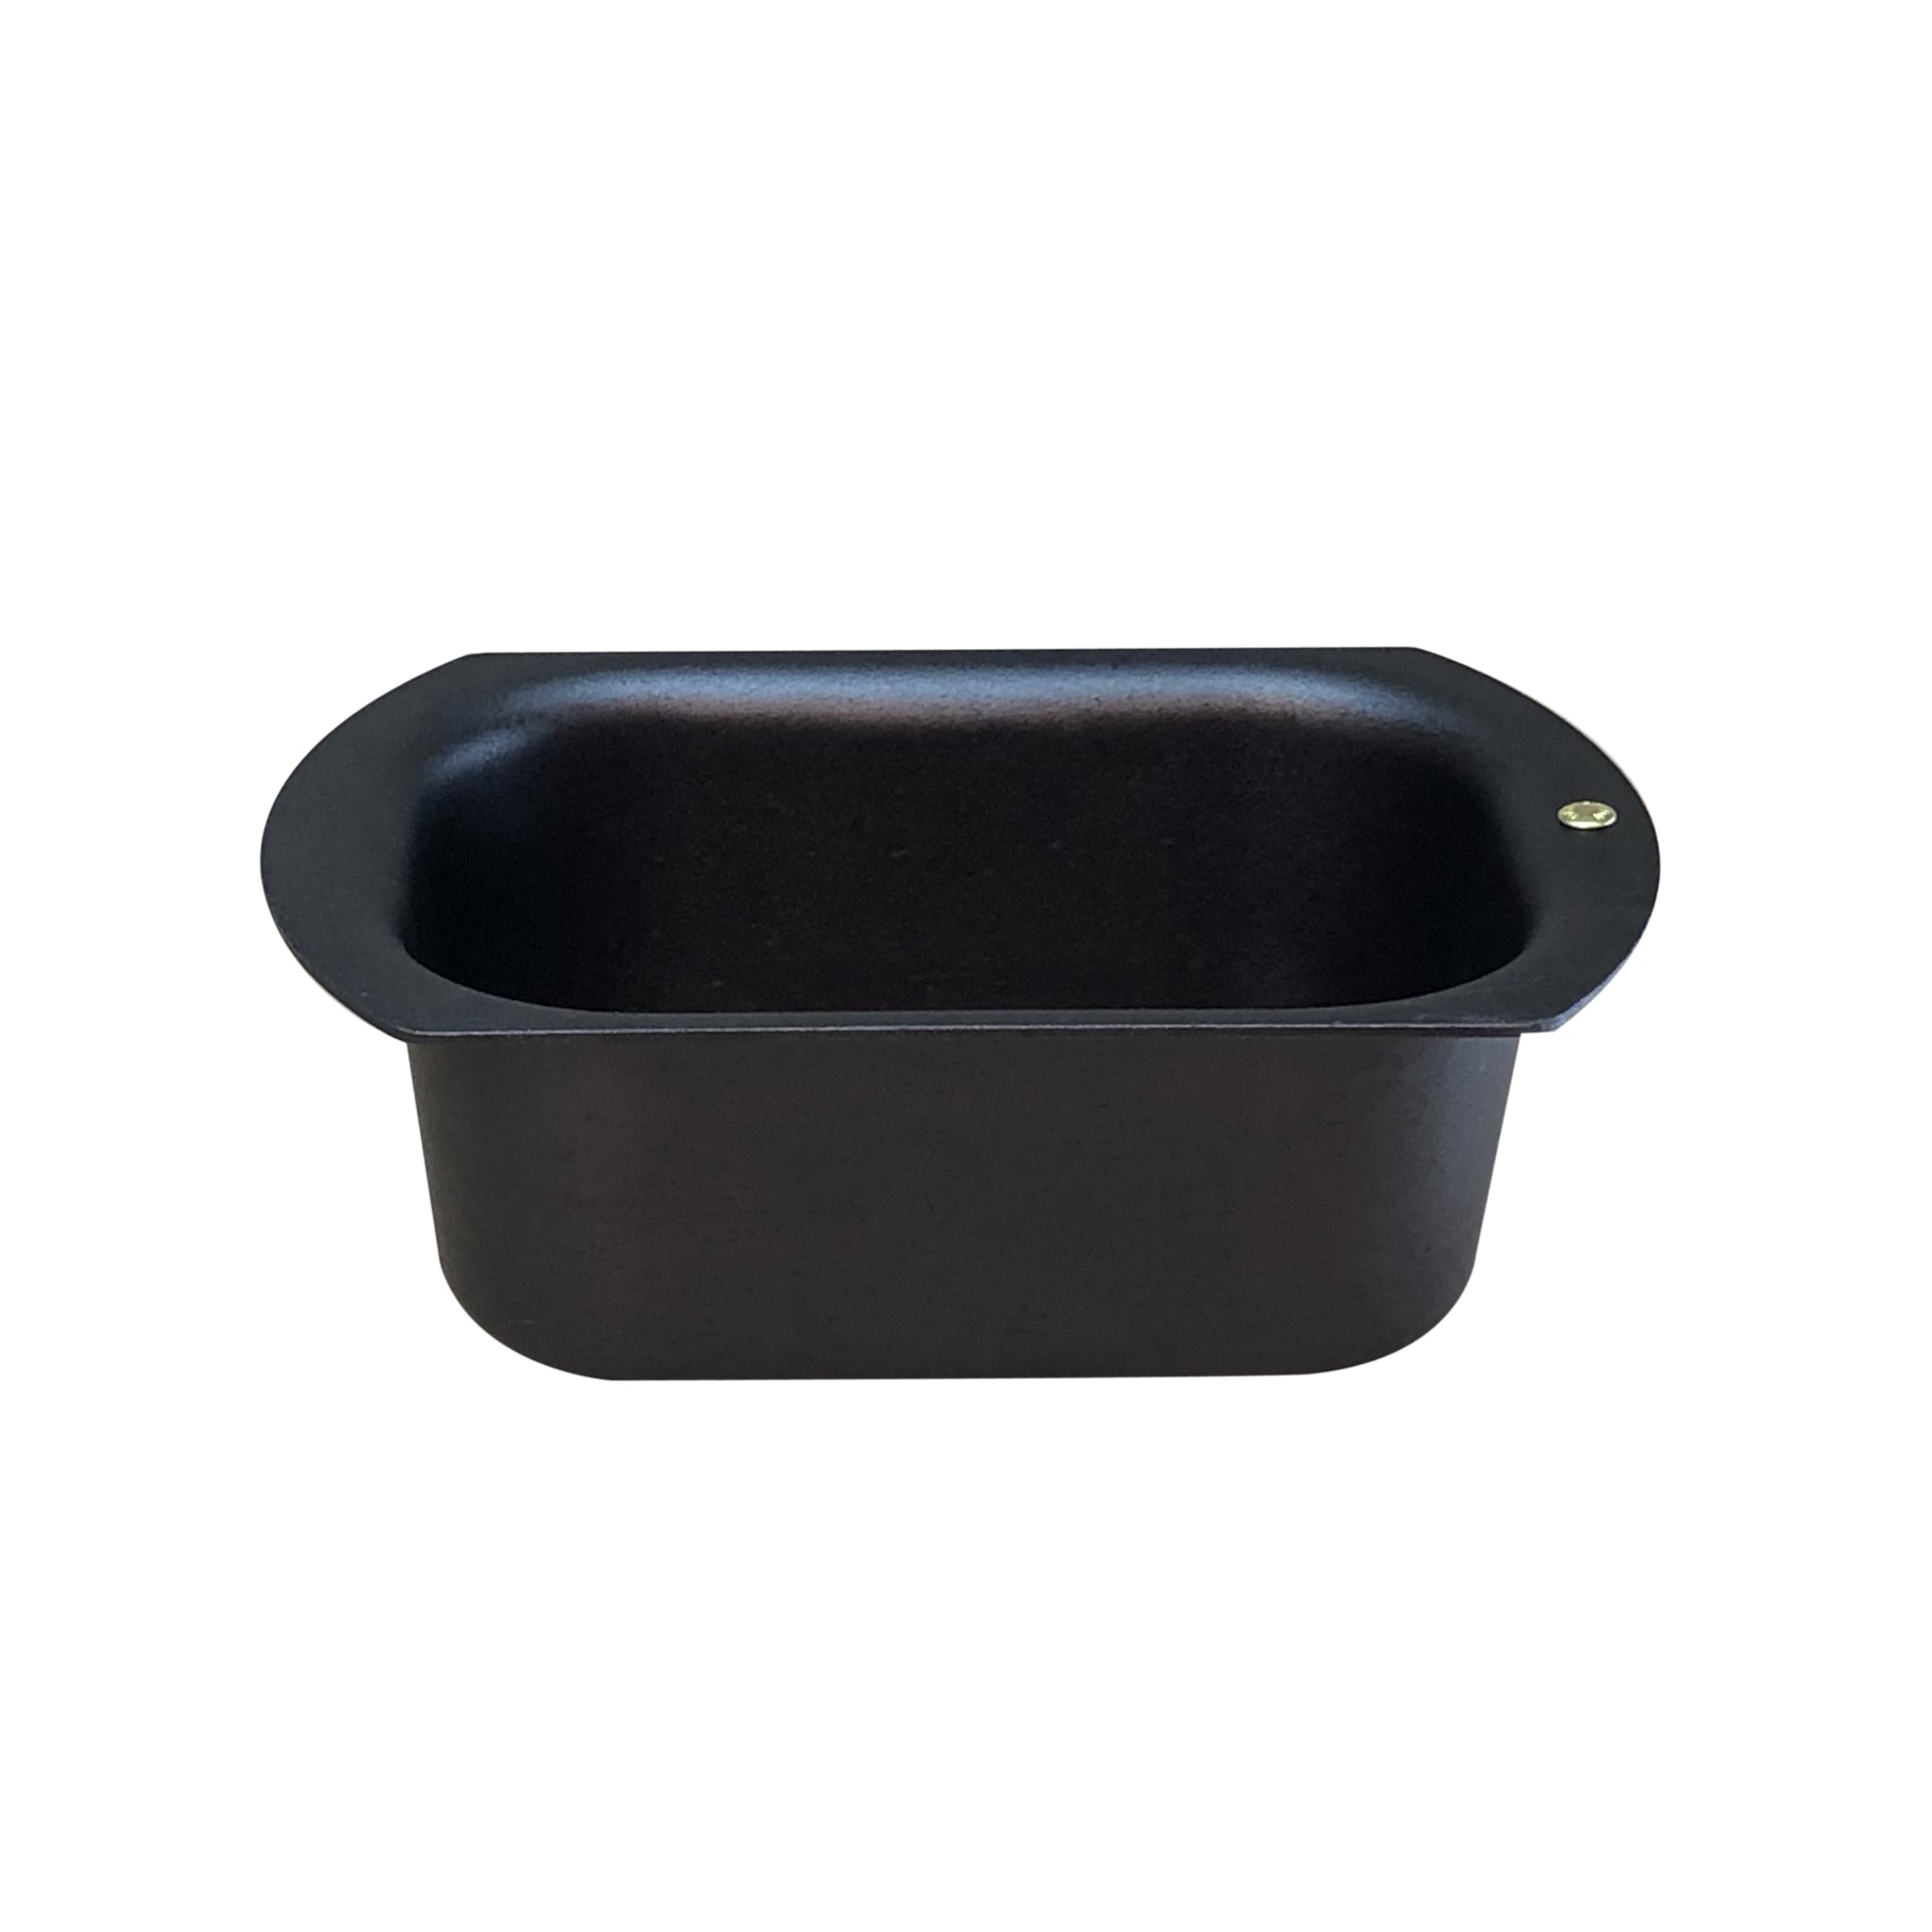 Spun Iron Baking Cloche and Tray – MARCH